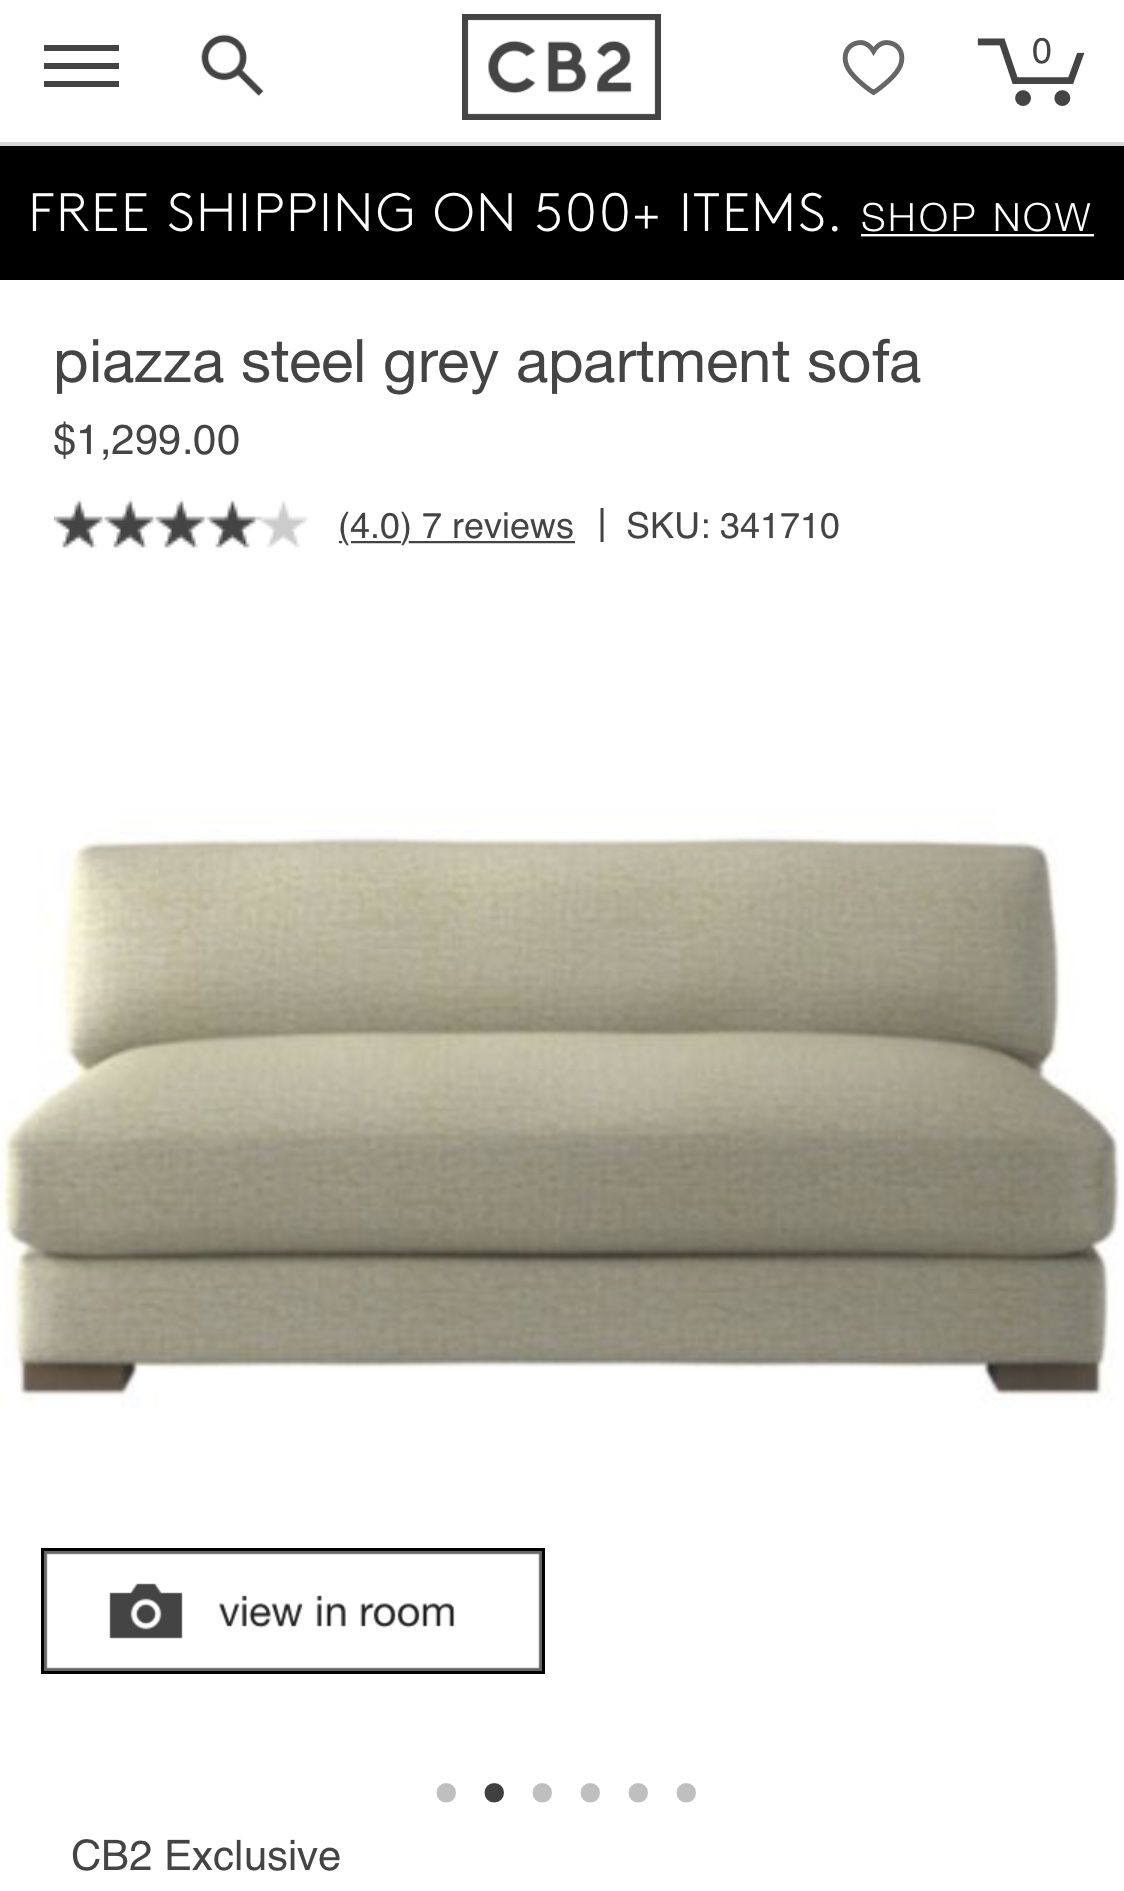 Used CB2 couch